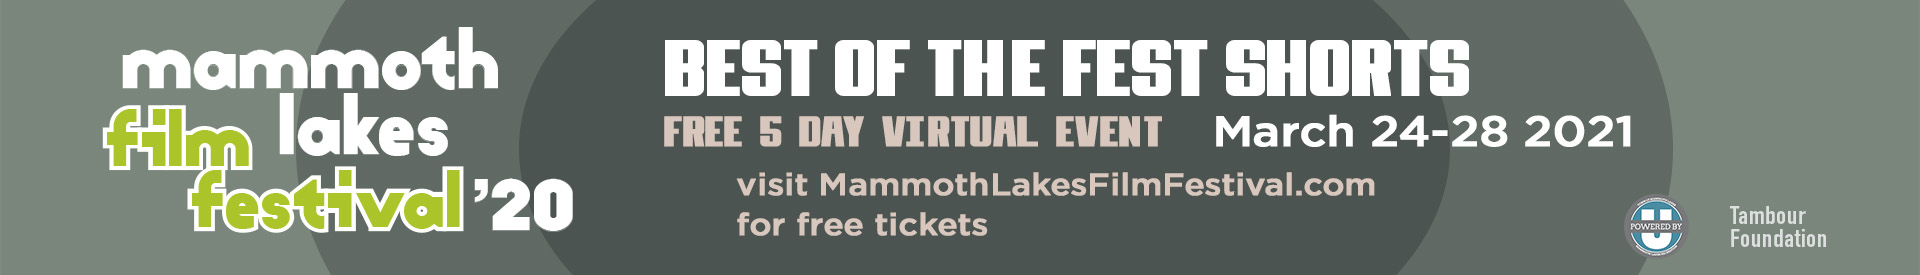 Mammoth Lakes Film Fest '20 - Best of the Fest Shorts